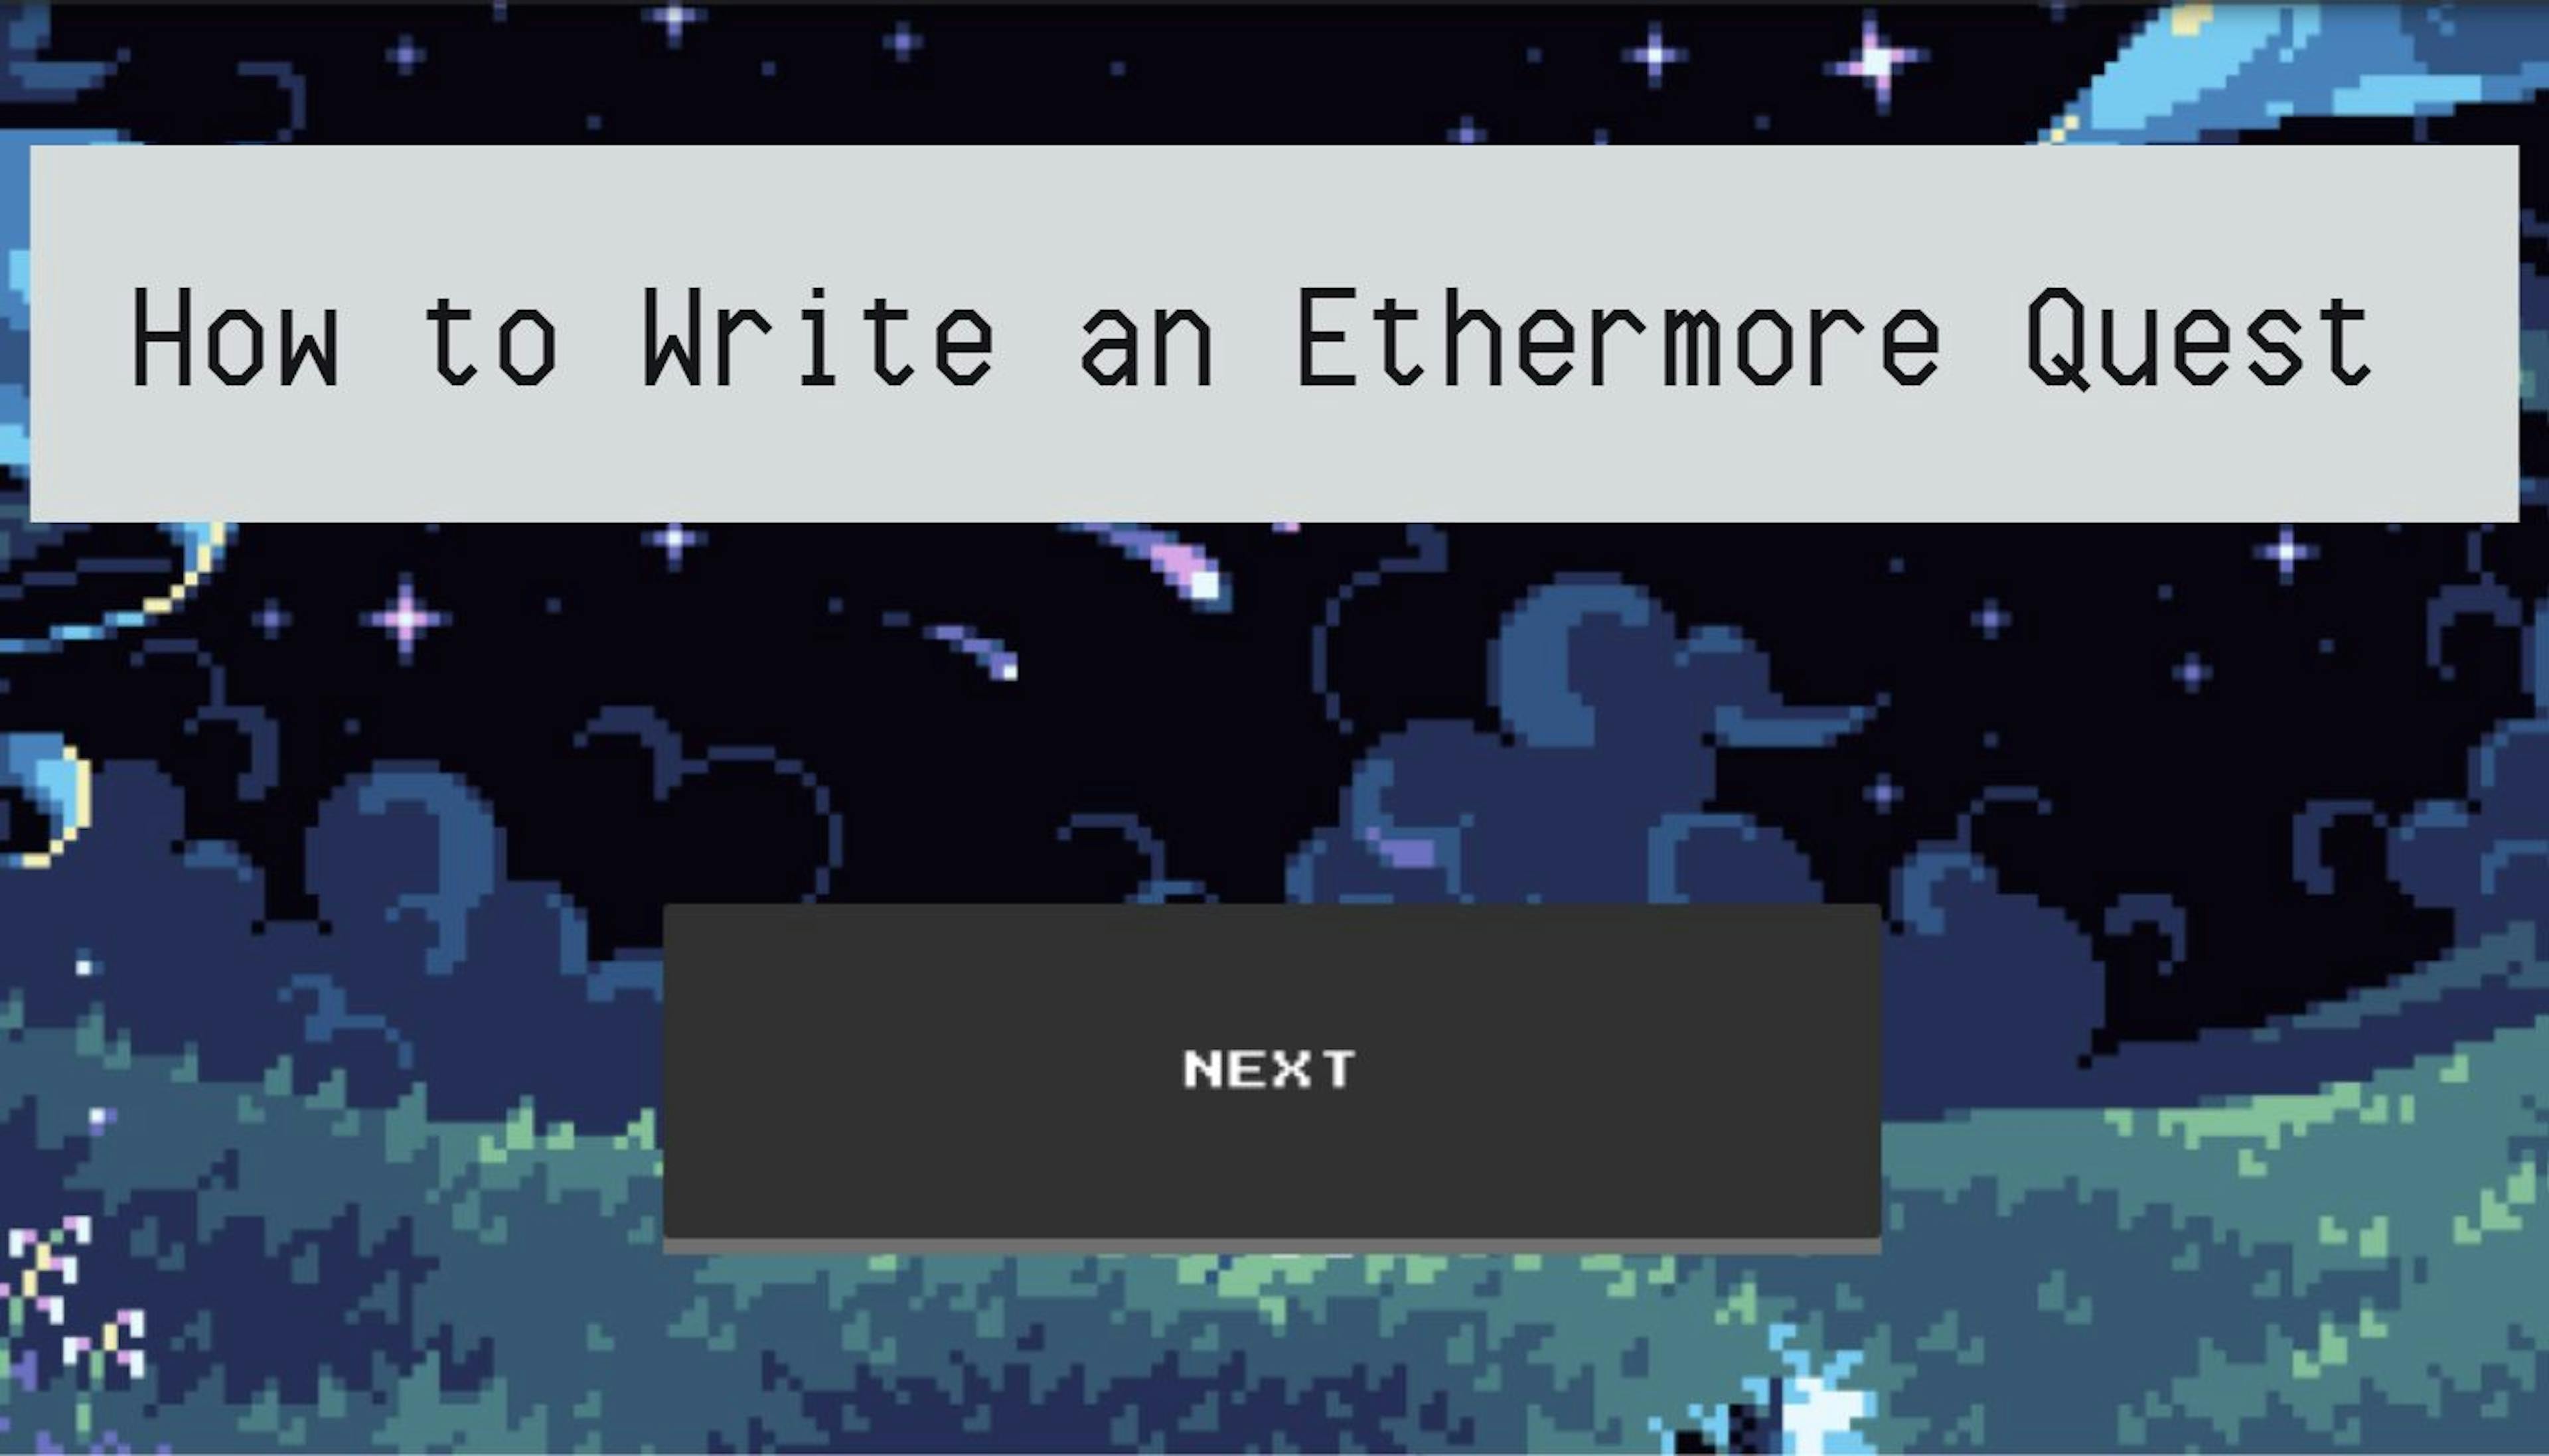 featured image - How to Start Your Video Game Quest Writing Career on Ethermore